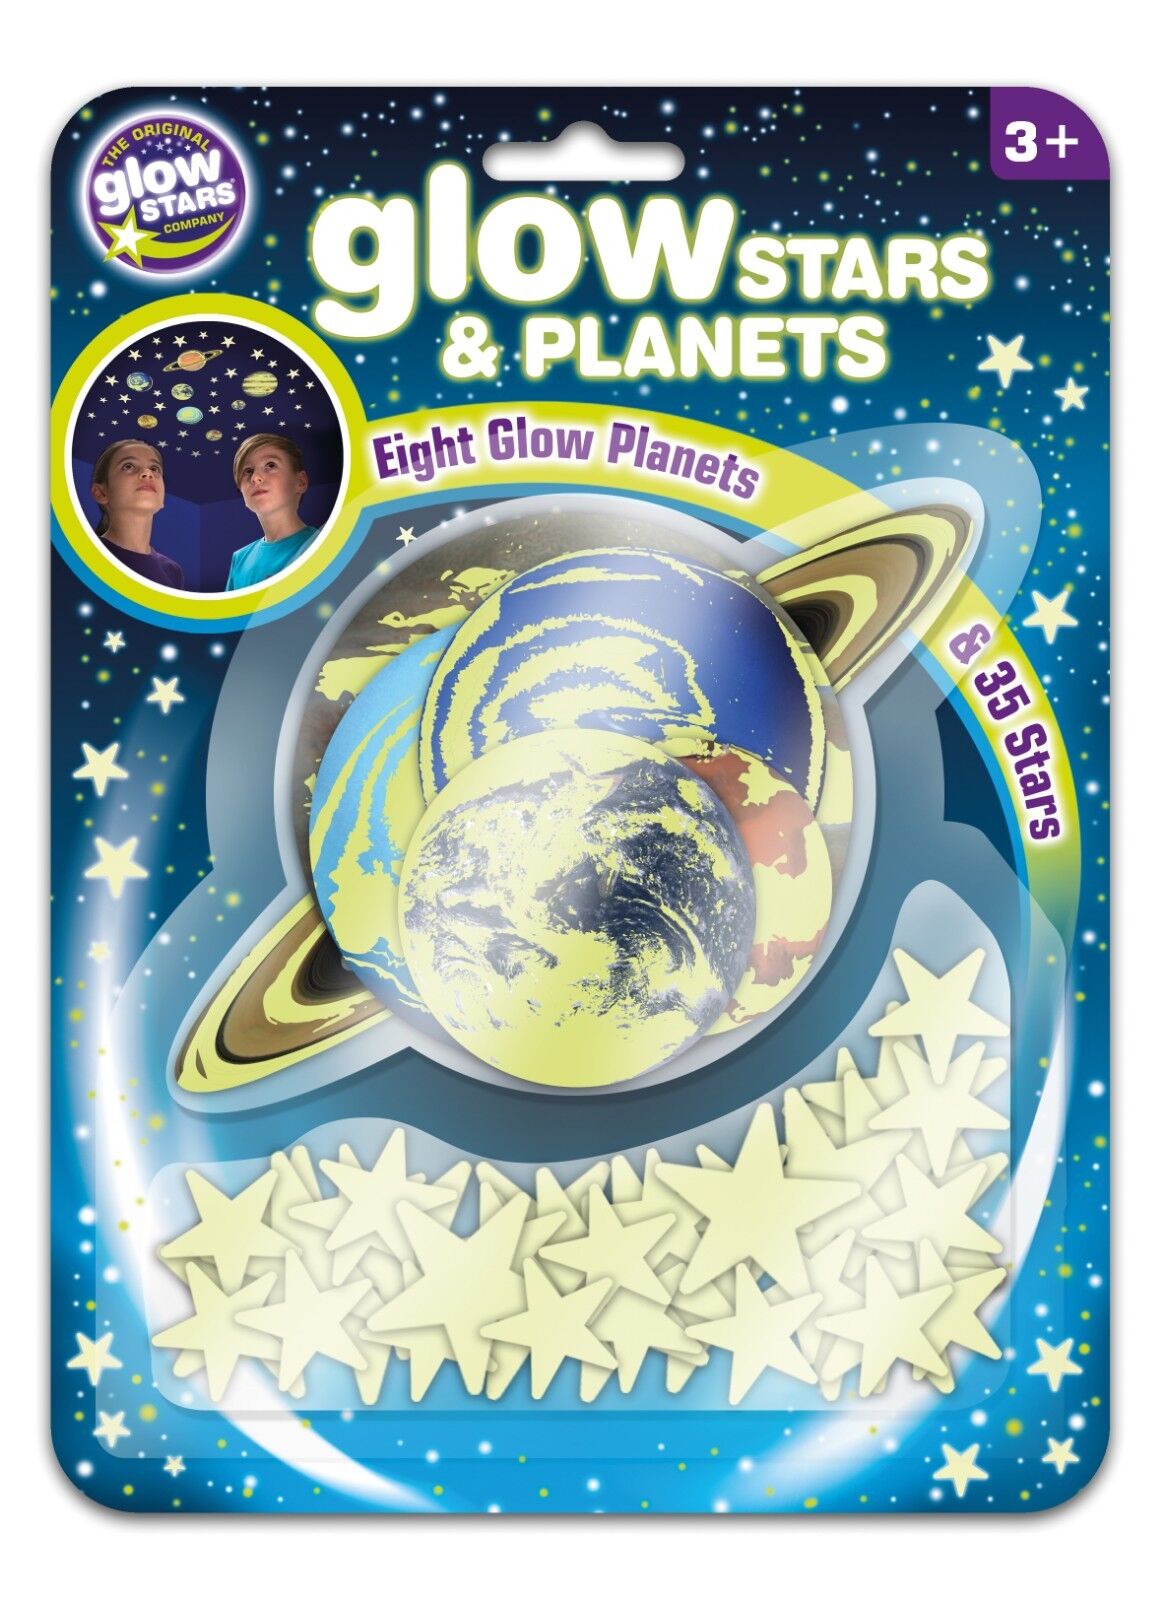 Quality Glow in the Dark Stickers and Shapes - Glitter, Stars,Planets, Dinosaurs